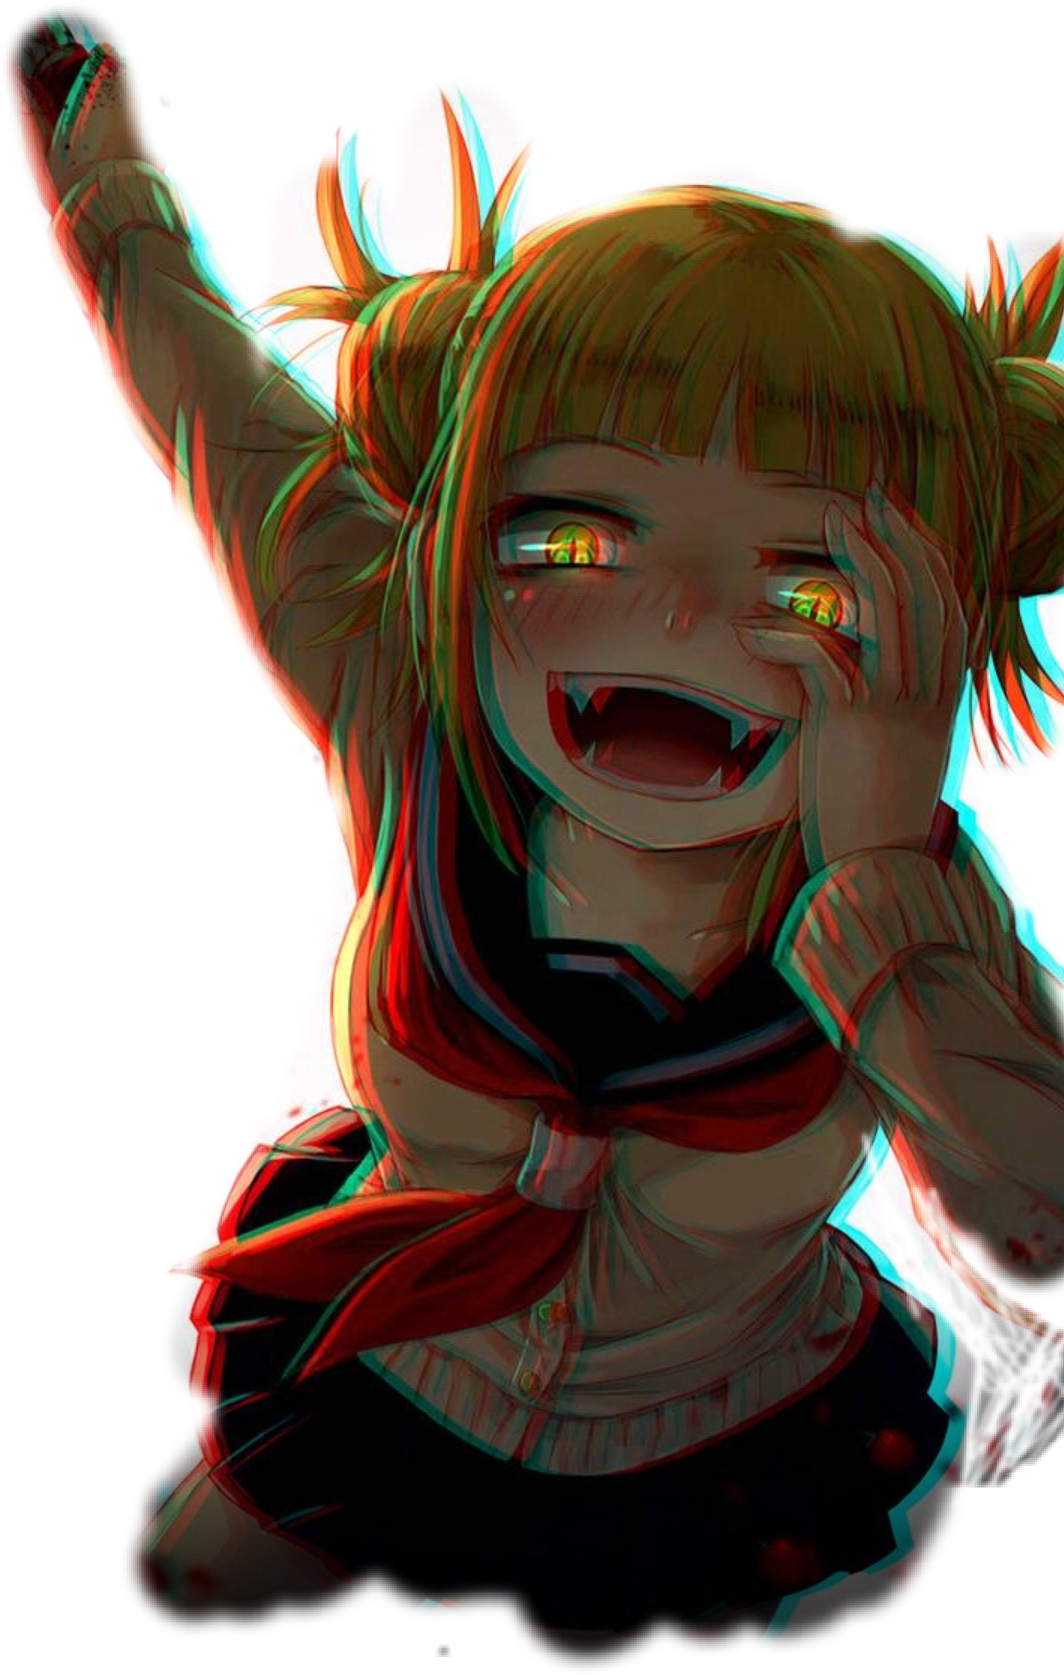 This visual is about bnha toga cute crazy freetoedit #bnha #toga #cute #cra...